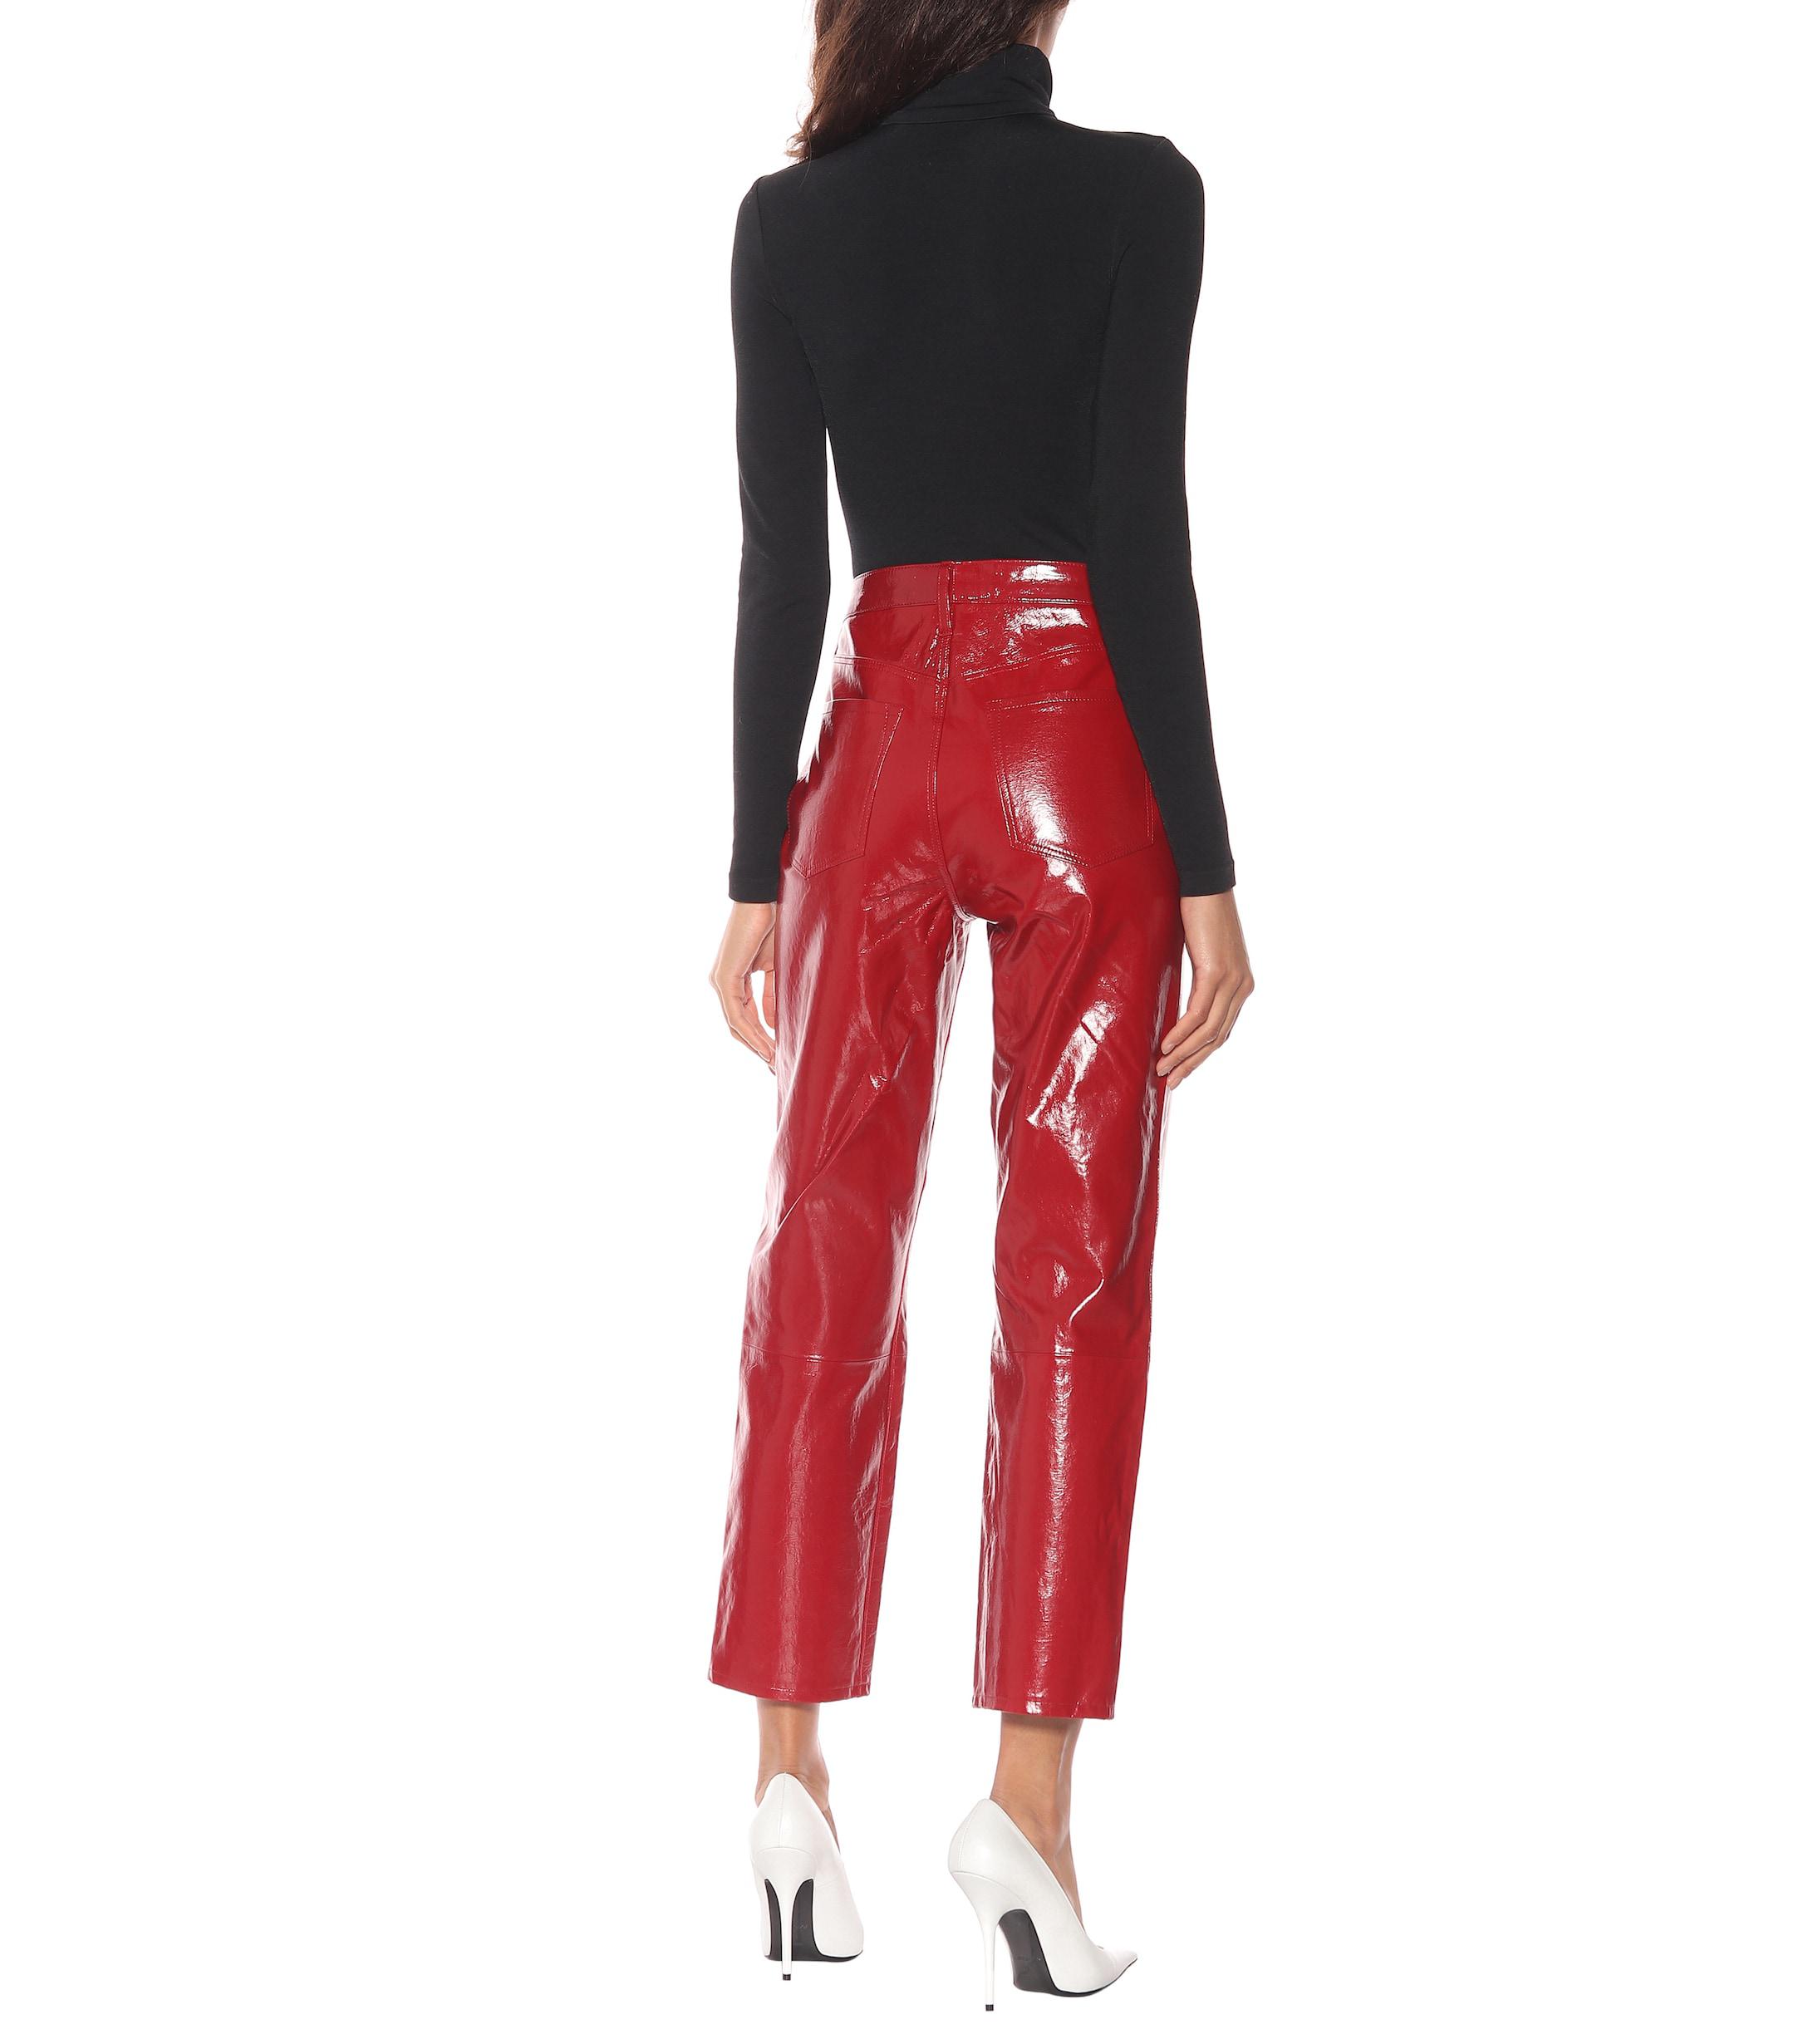 J Brand Ruby High-rise Patent Leather Pants in Red - Lyst